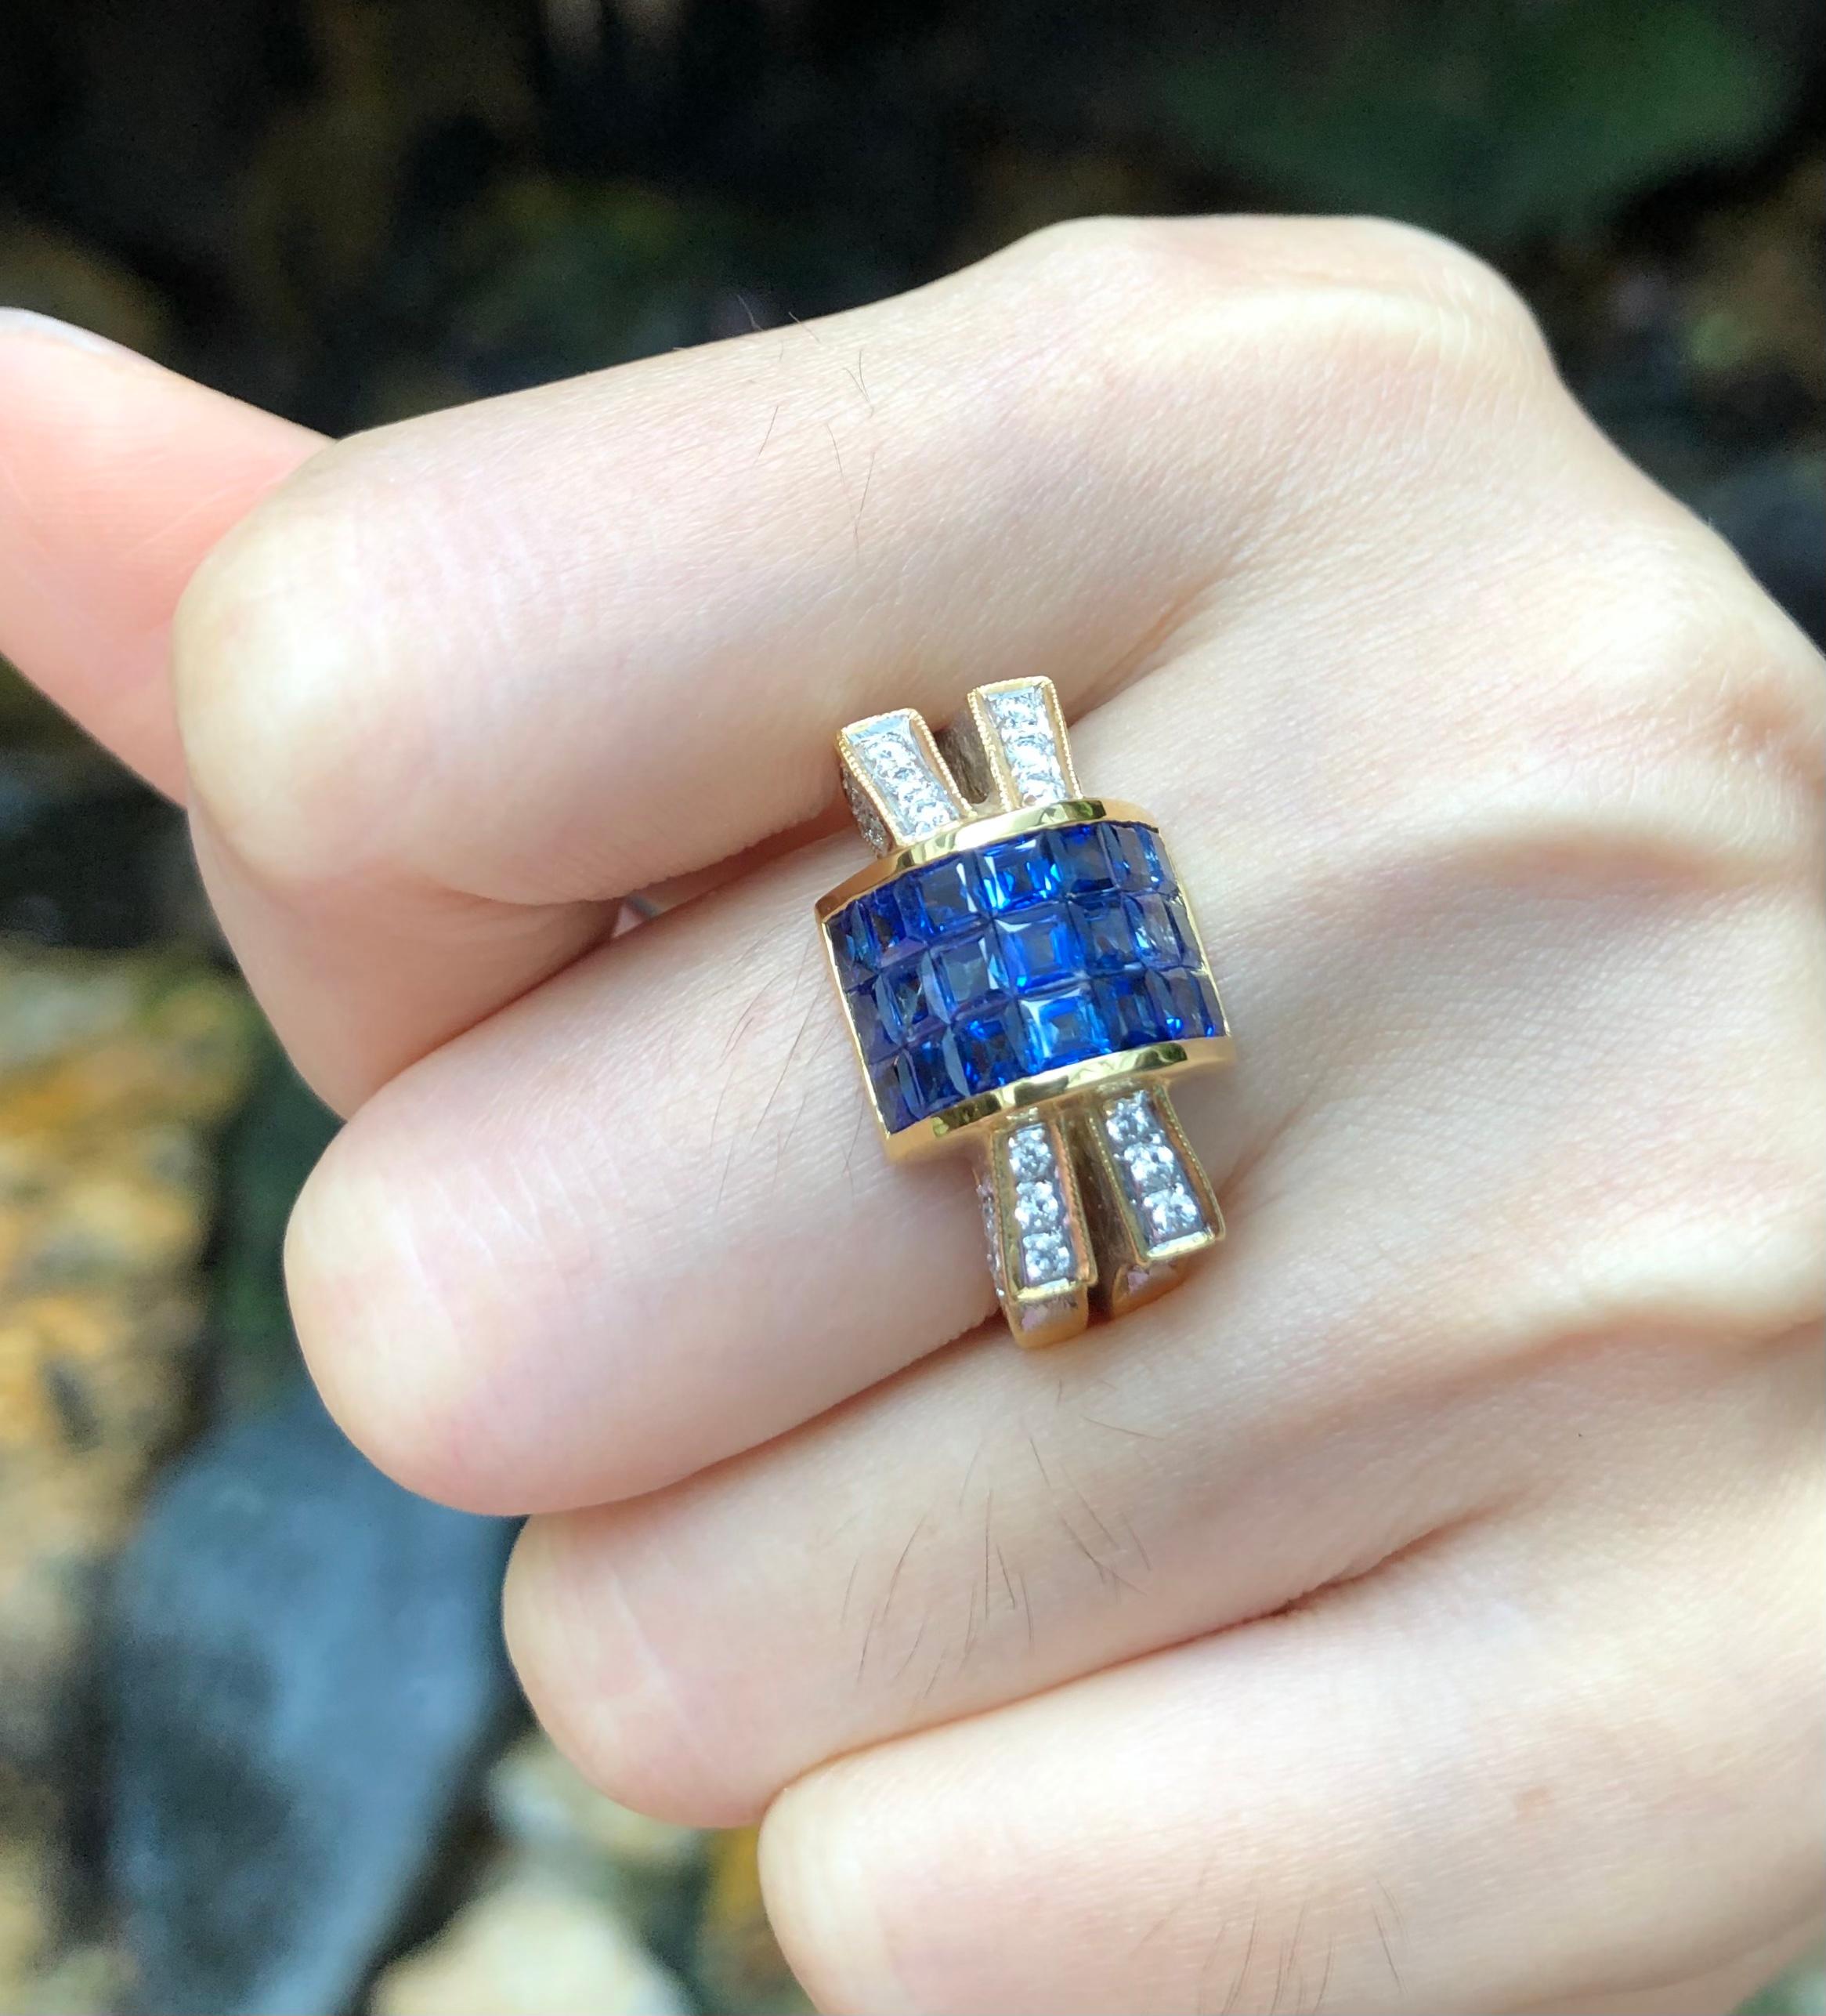 Blue Sapphire 3.10 carats with Diamond 0.50 carat Ring set in 18 Karat Gold Settings

Width:  2.1 cm 
Length:  1.3 cm
Ring Size: 54
Total Weight: 13.95 grams

